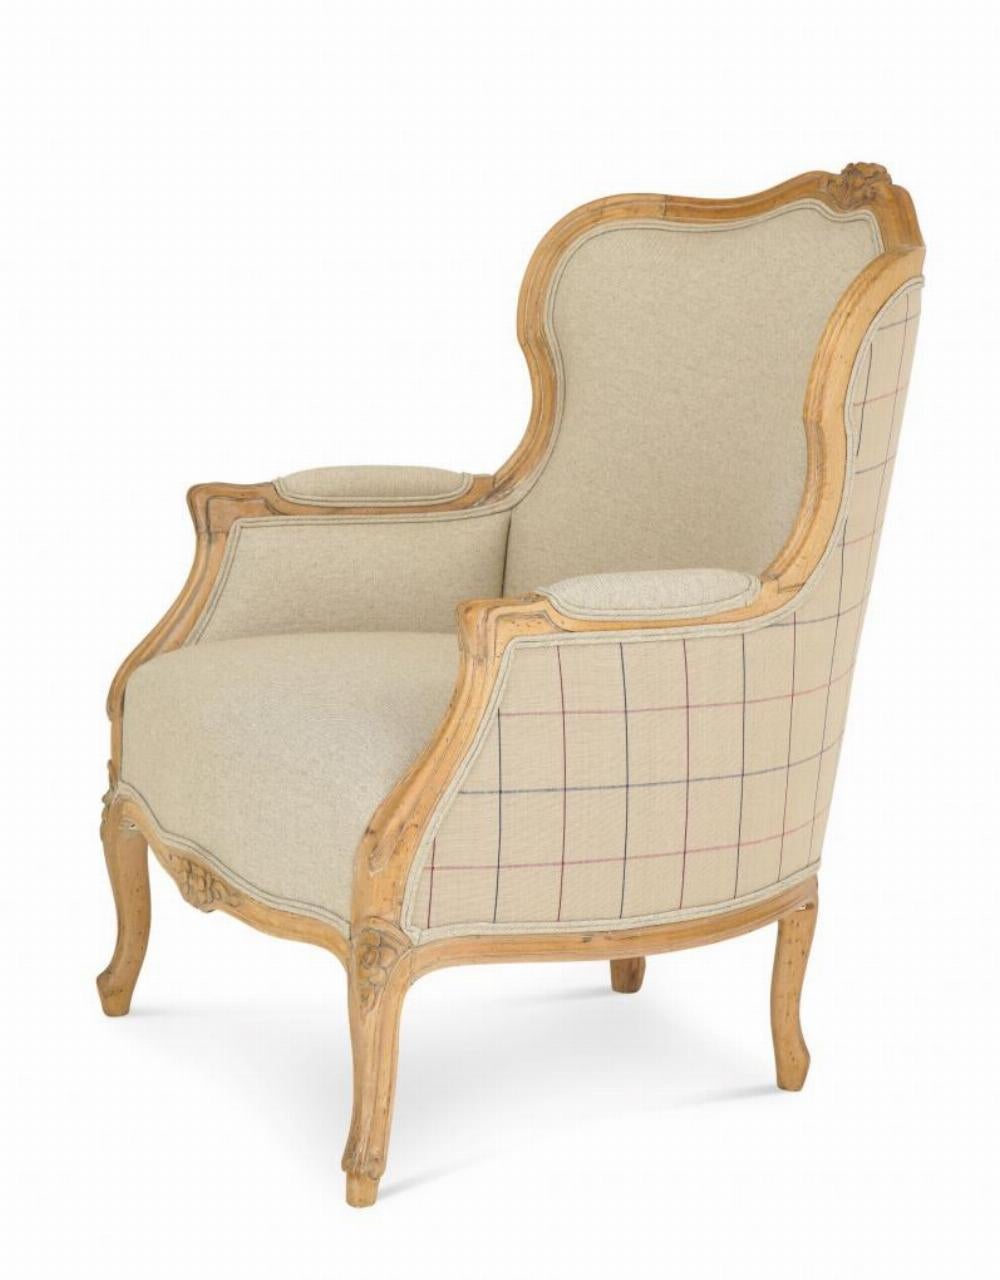 A Louis XV style armchair with a very classic French accent in a beige linen. 1940's